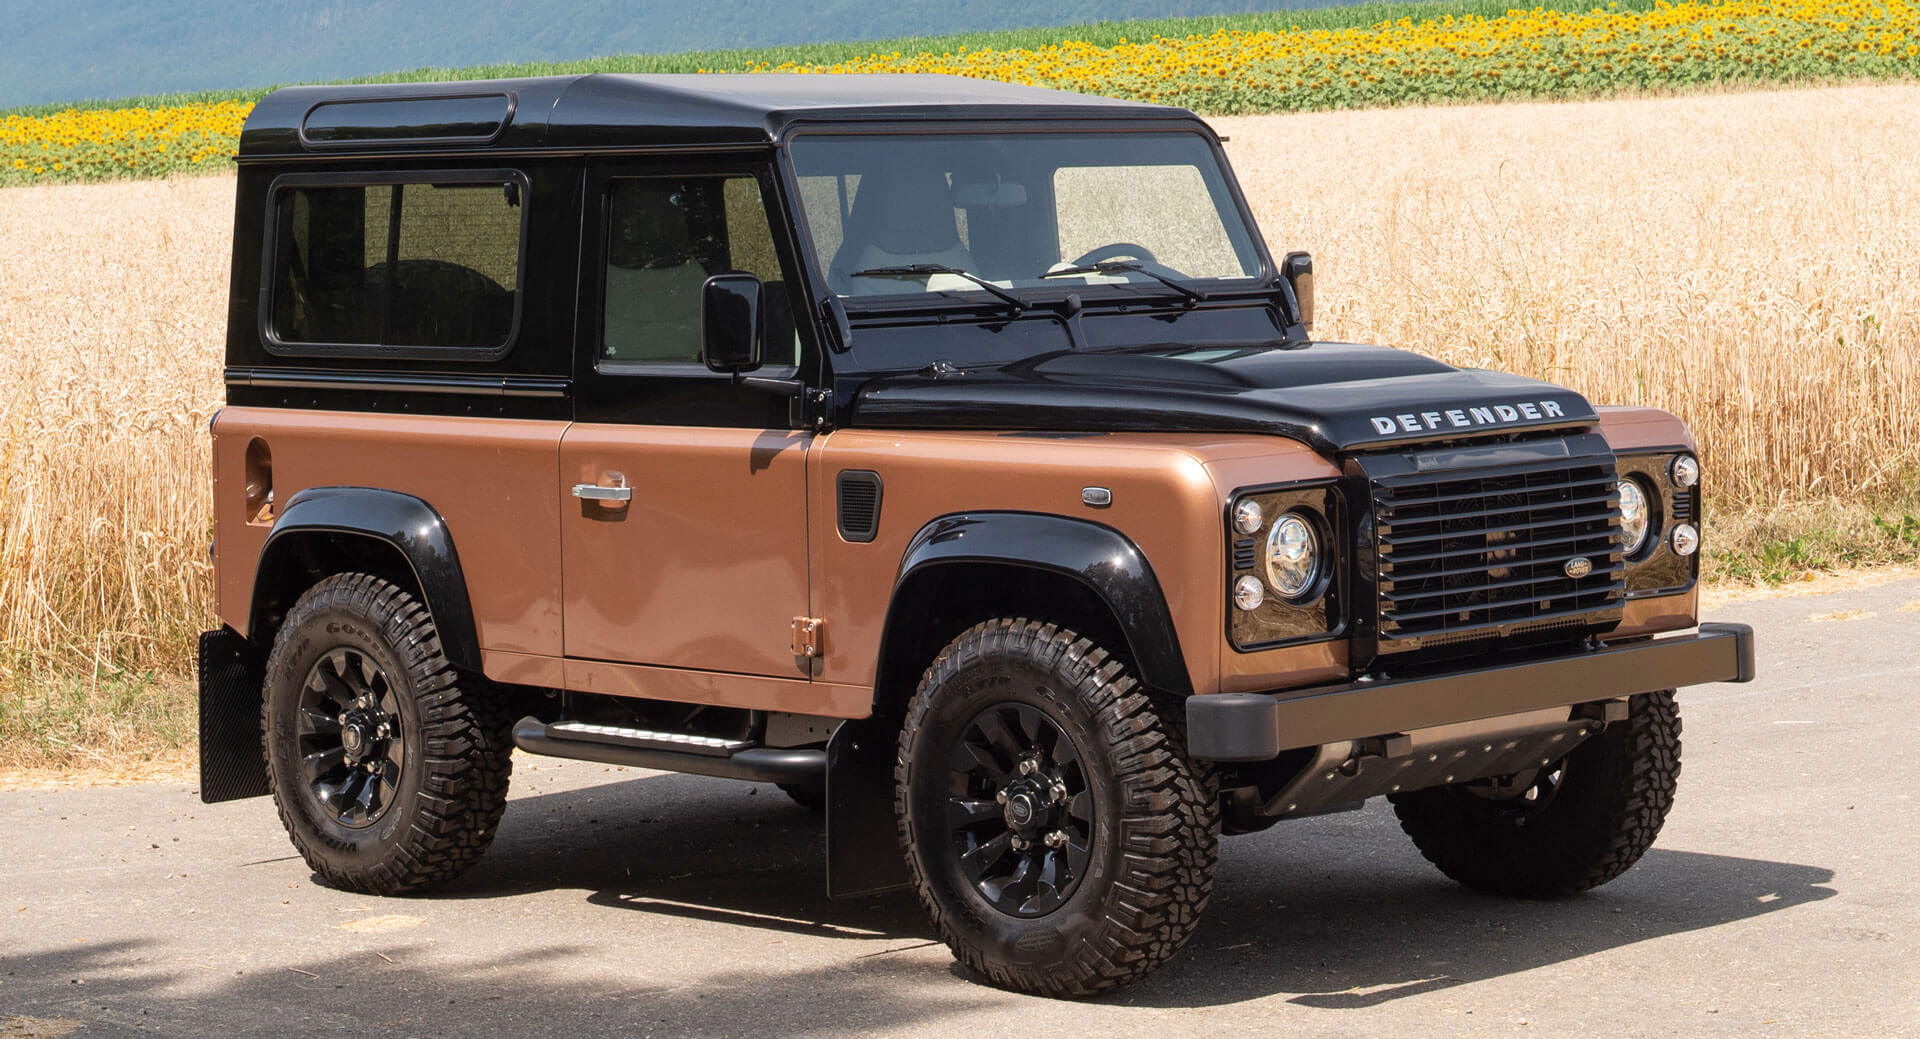 This New 2016 Defender Autobiography The Truly New 2020 Defender? | Carscoops